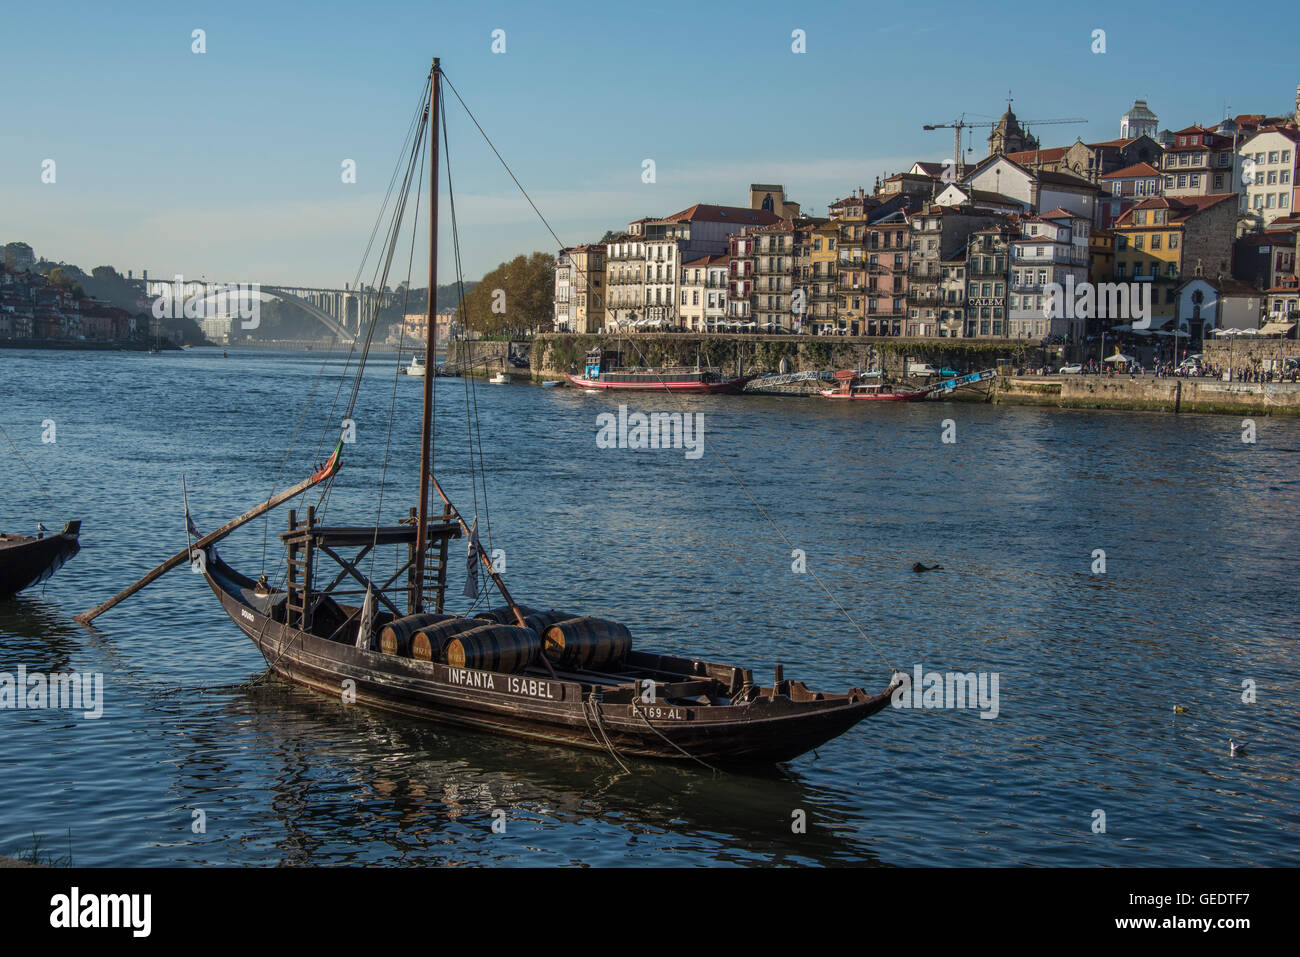 The Infanta Isabel, a wooden rabelo boat on the river Douro, Porto, Portugal. Stock Photo